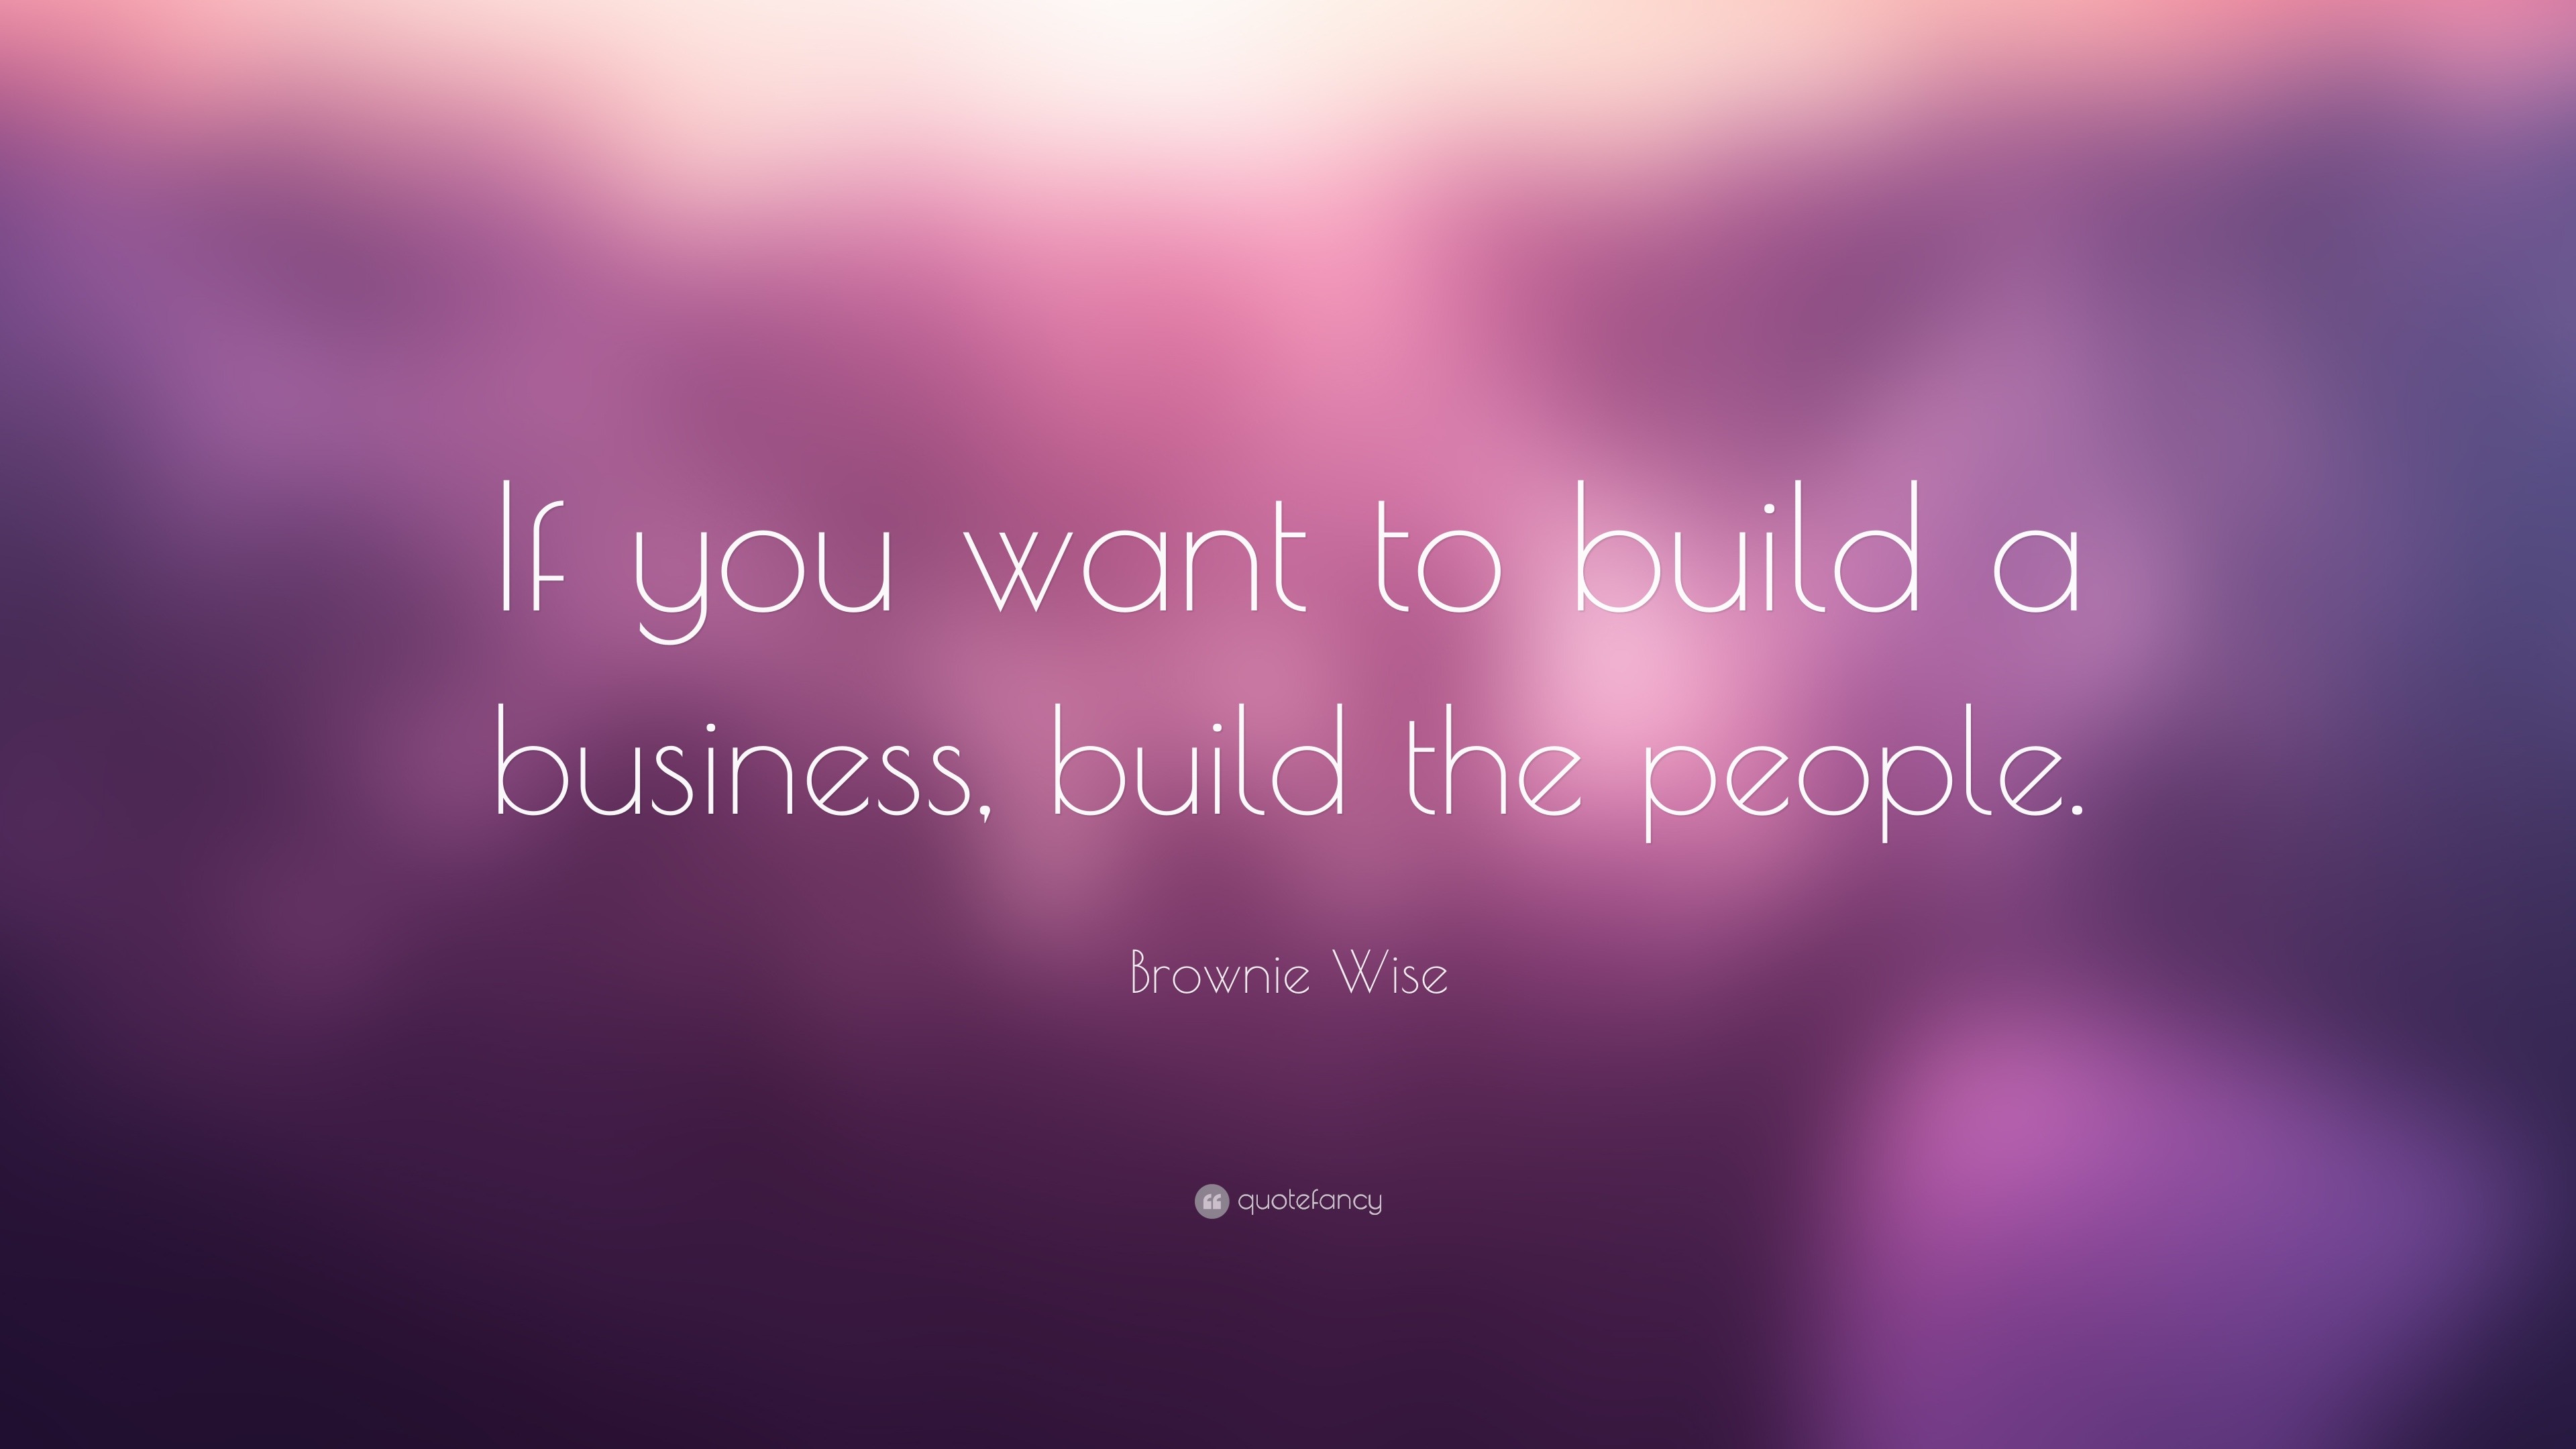 Brownie Wise Quote: "If you want to build a business ...